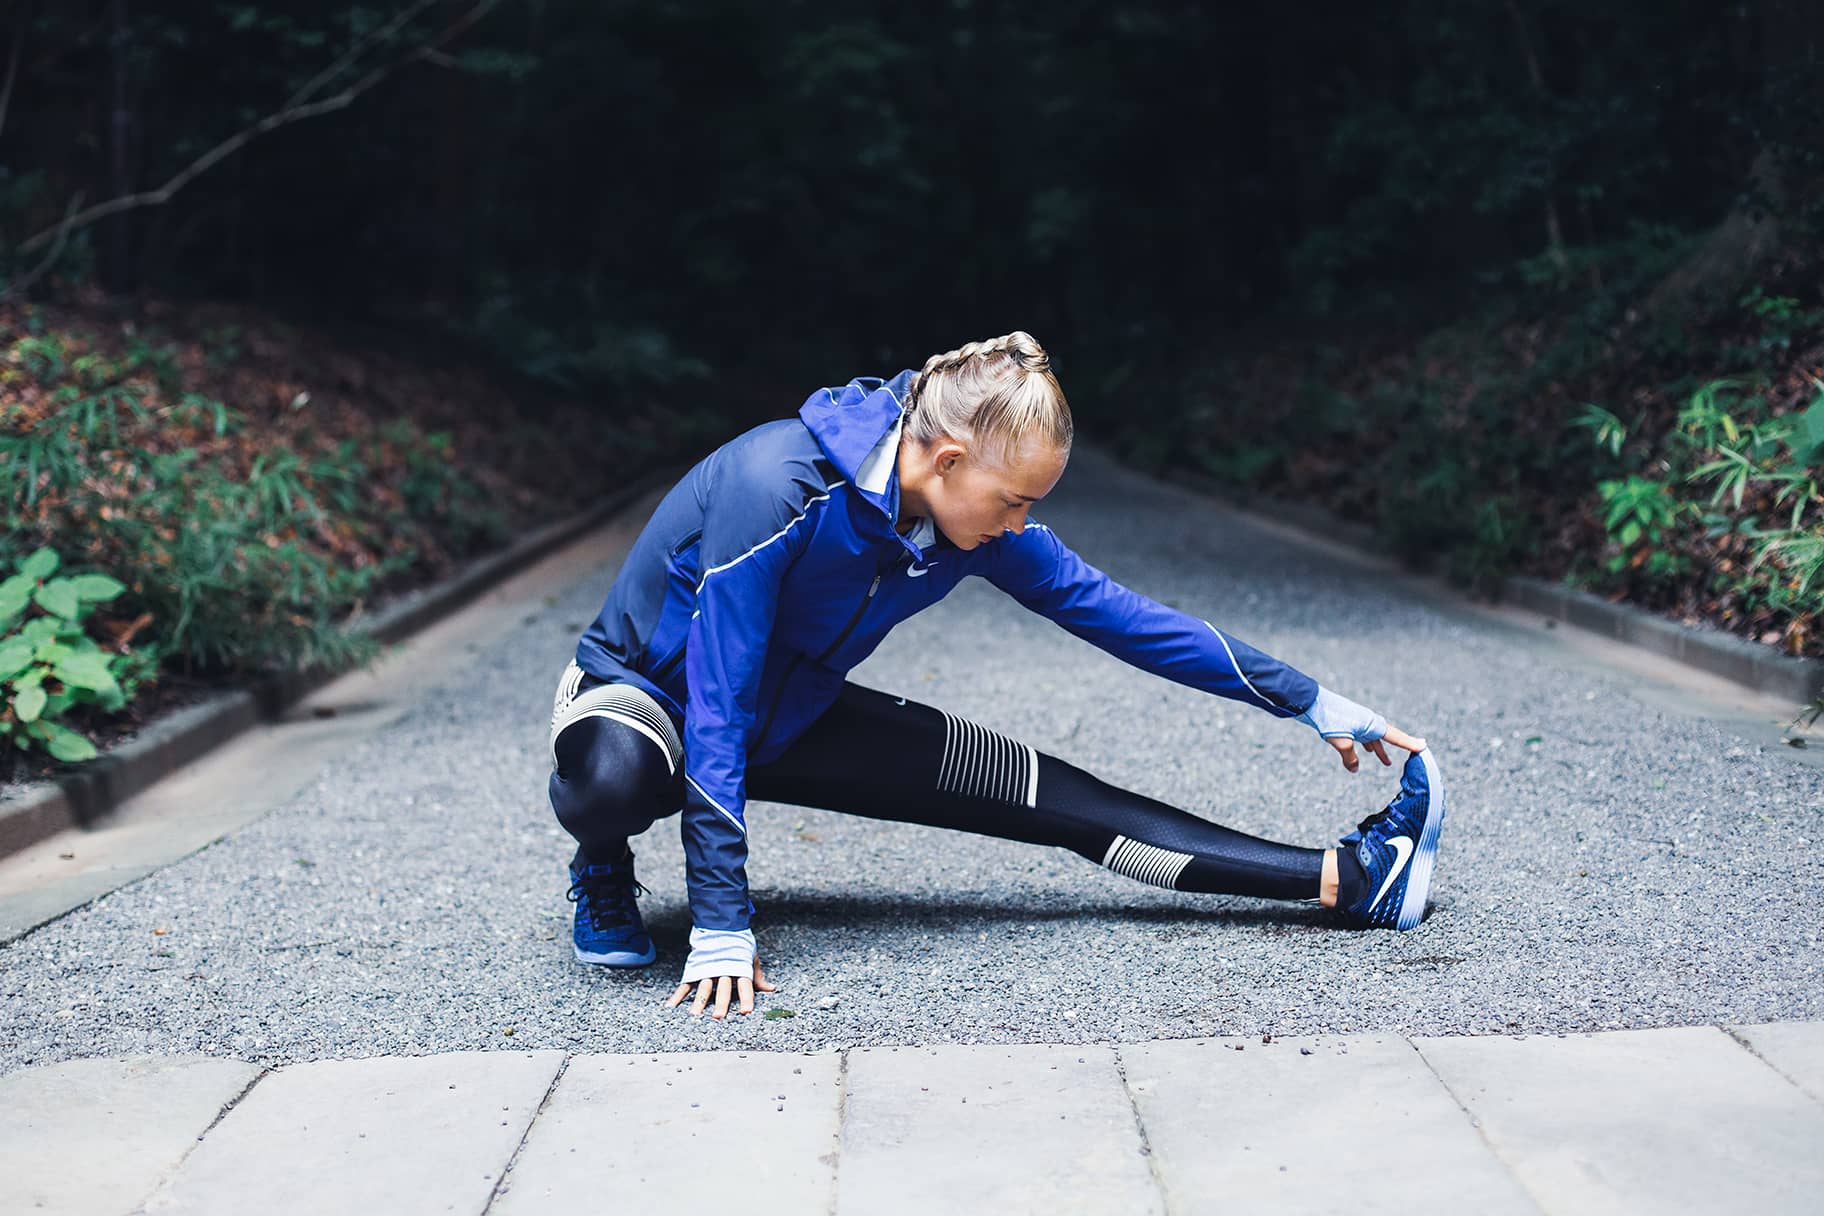 How To Prevent Stiff Muscles While Exercising in the Cold